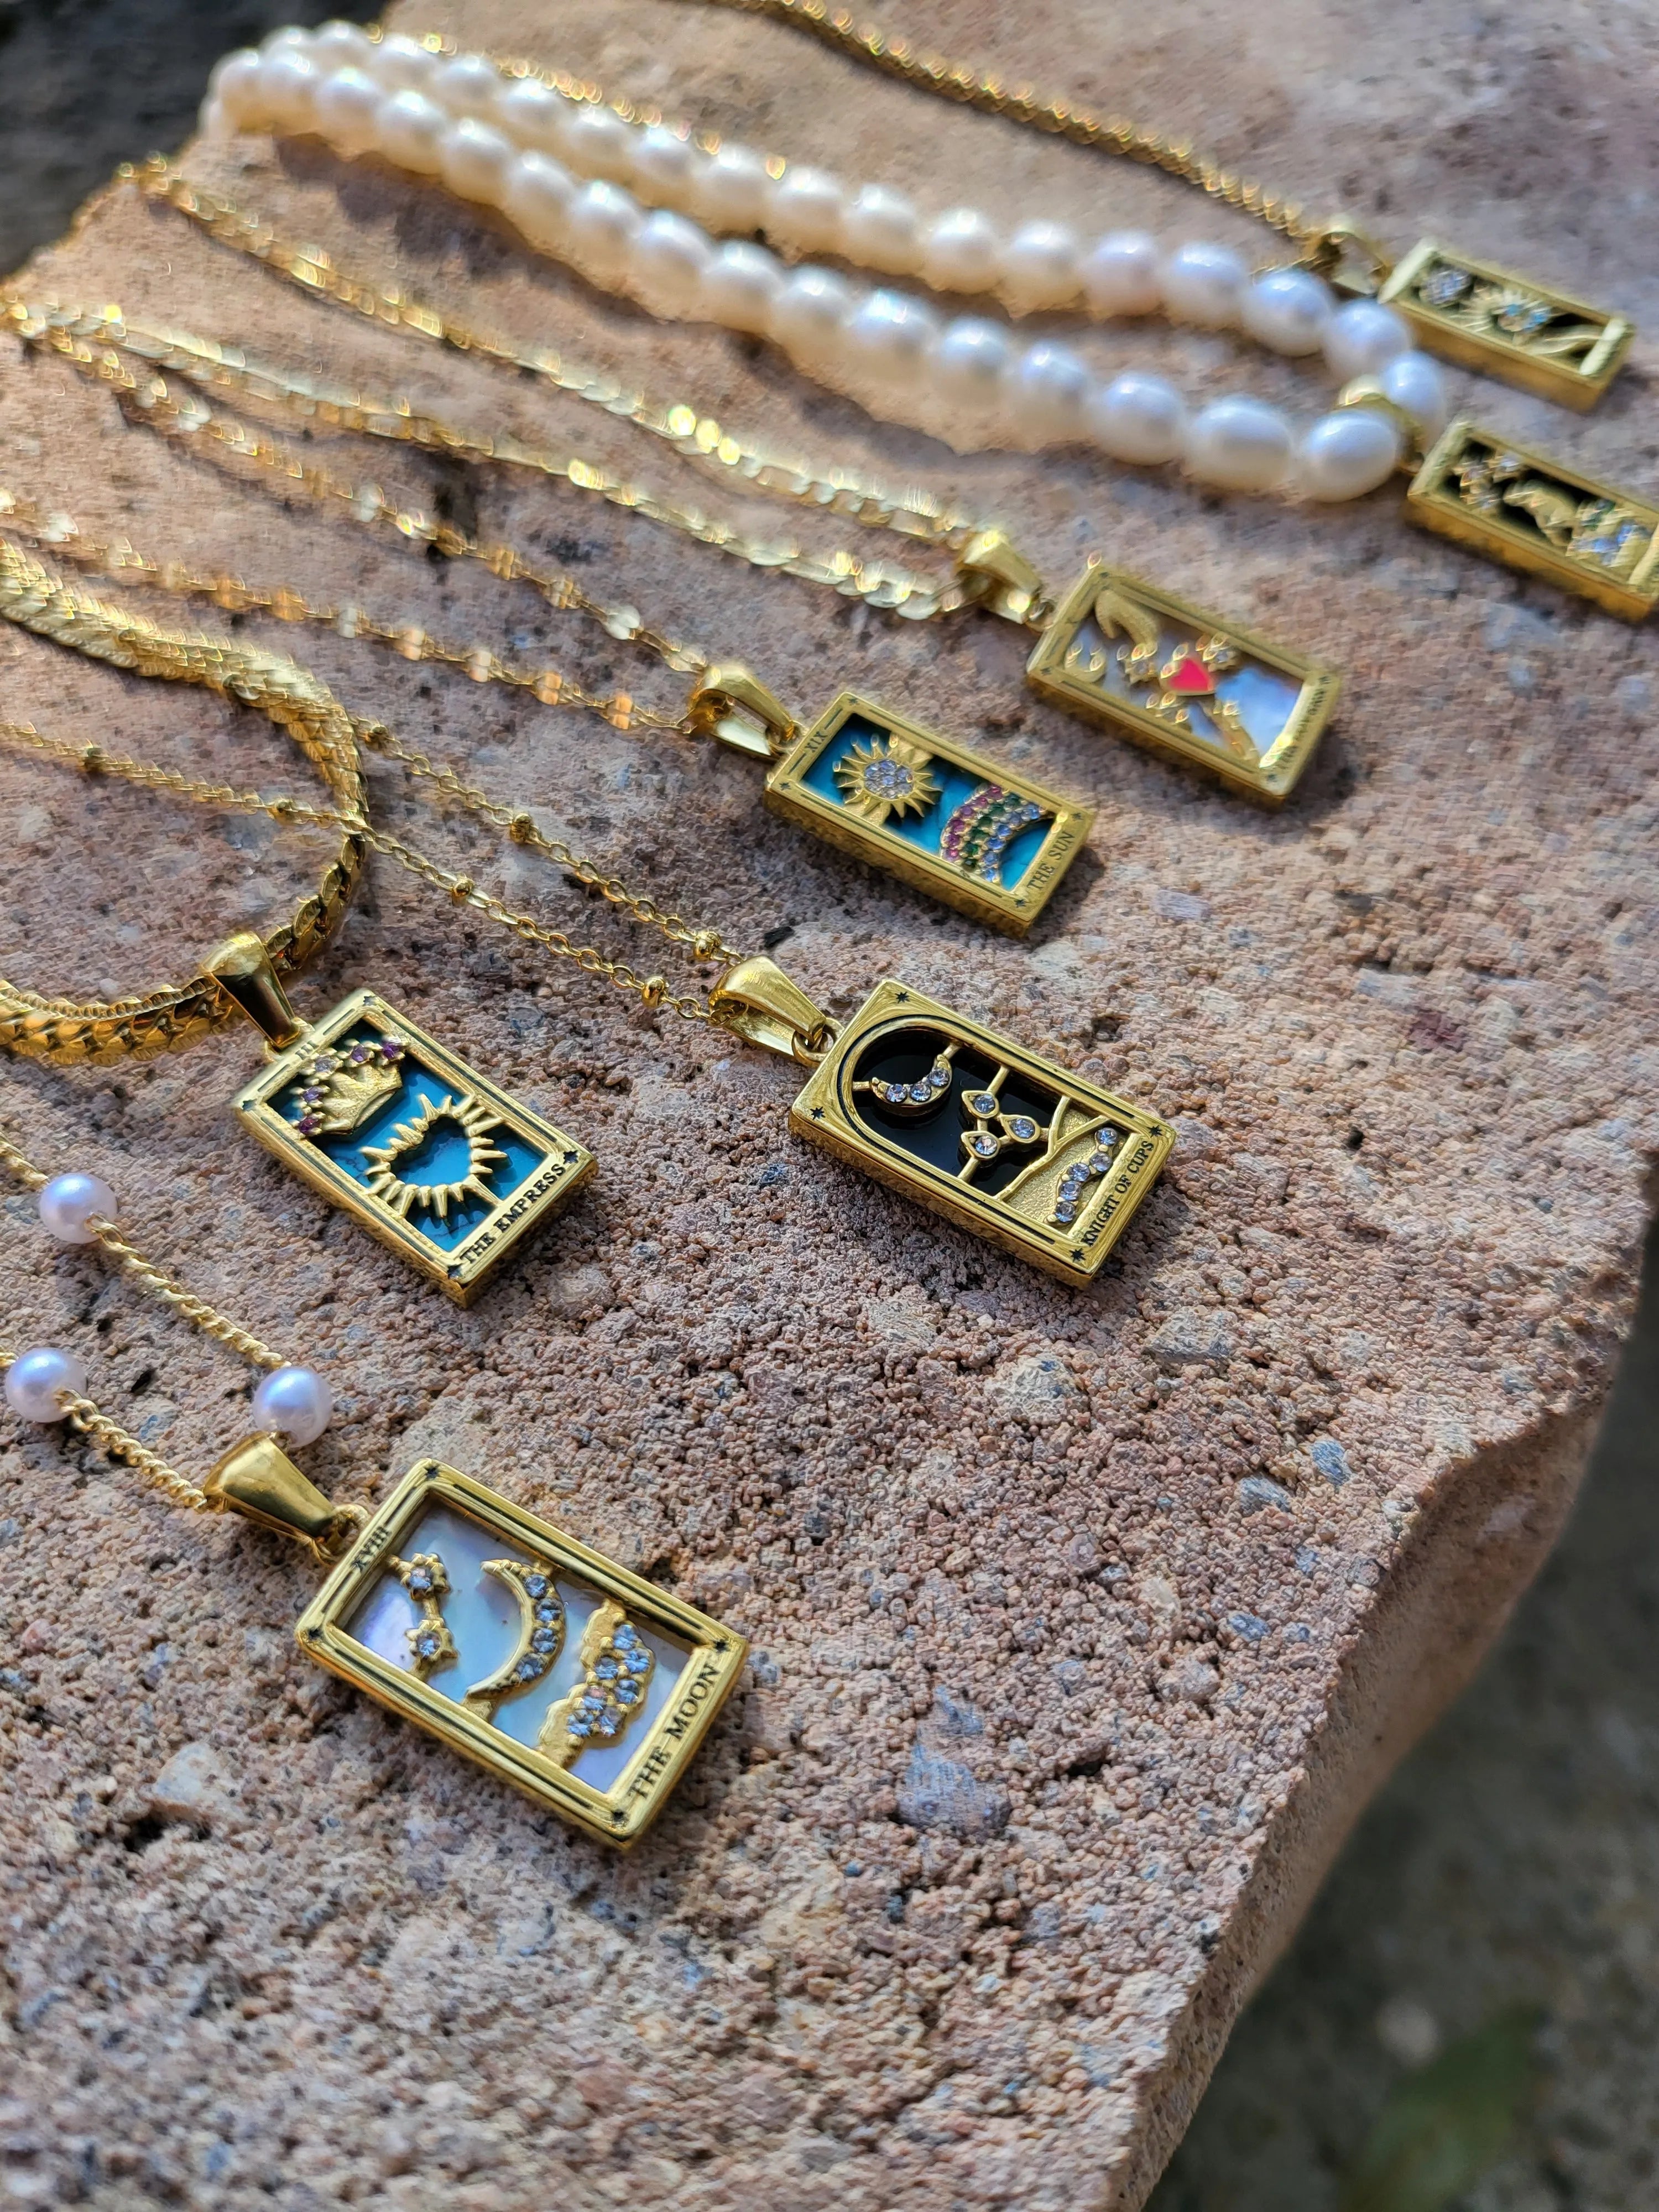 Gold Filled Tarot Necklace product images.